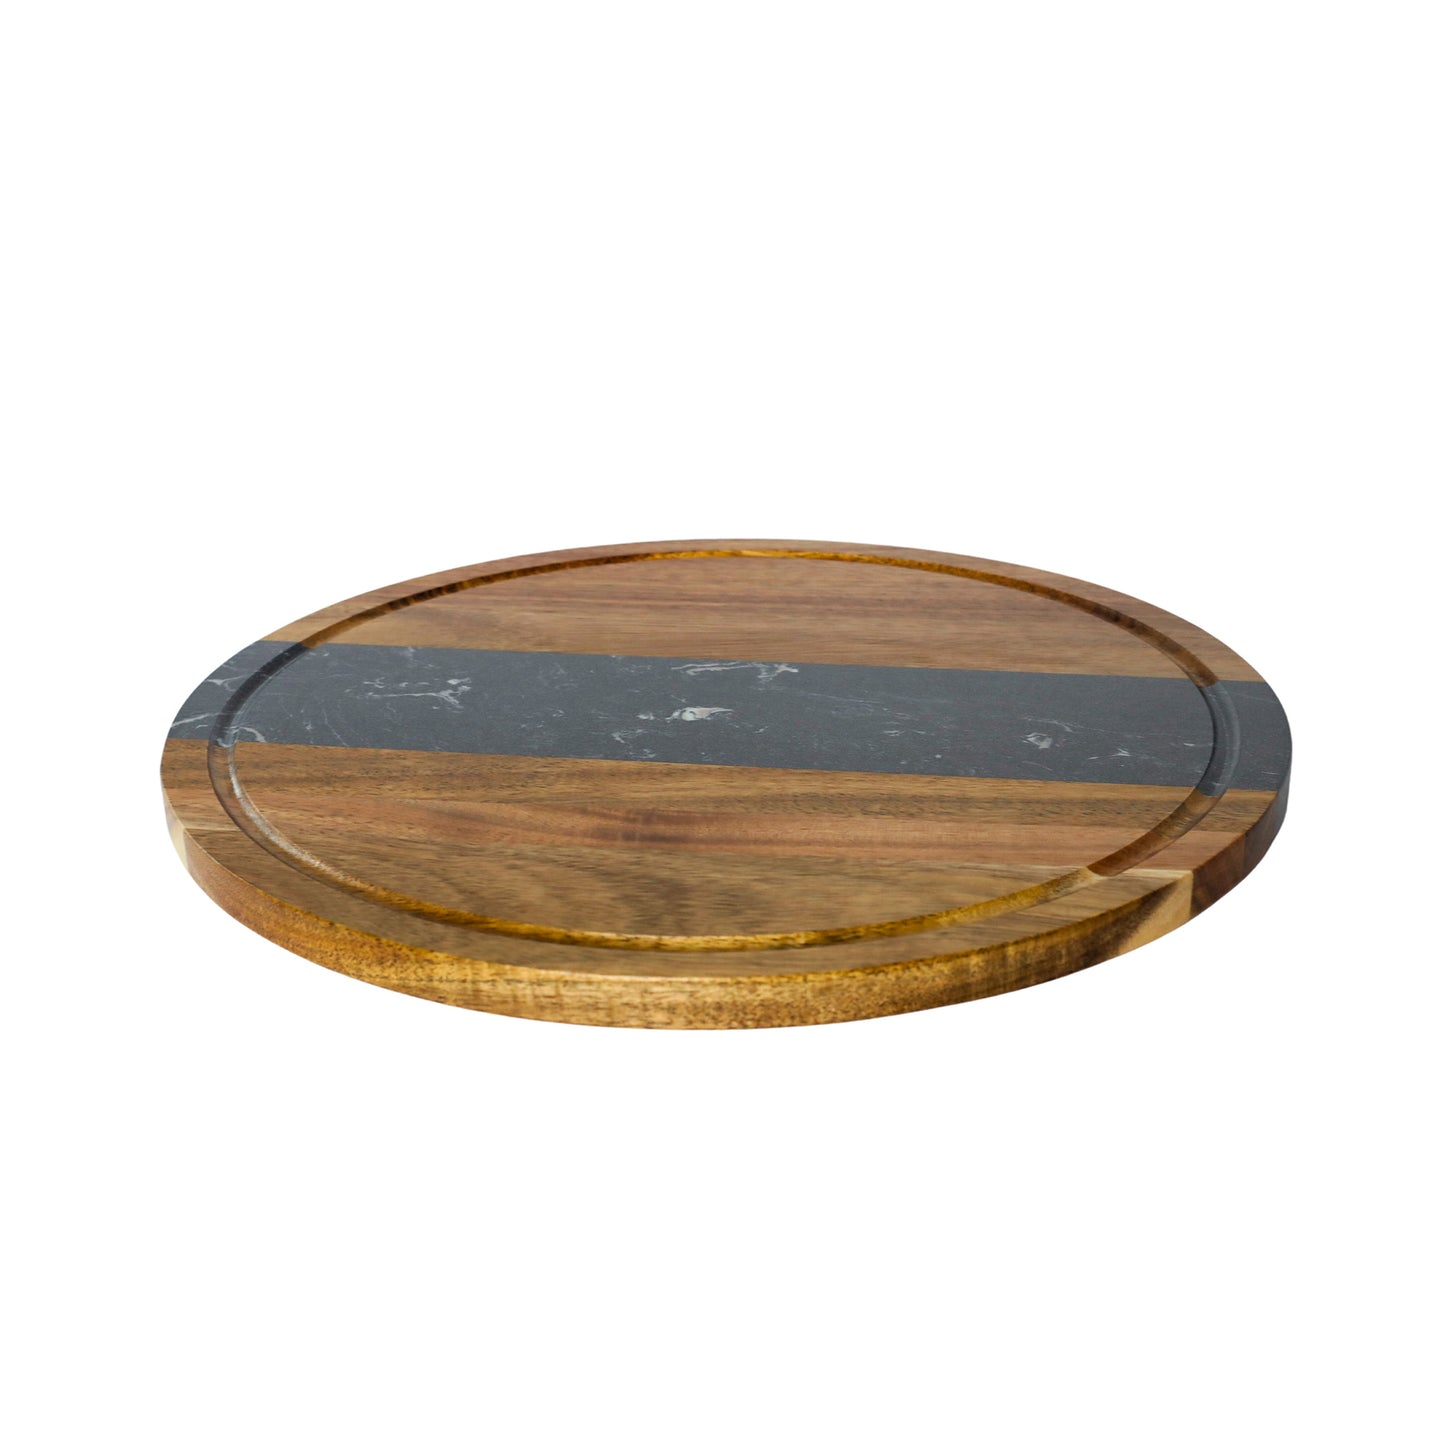 Black Marble and Acacia Wood Round Board - 11"